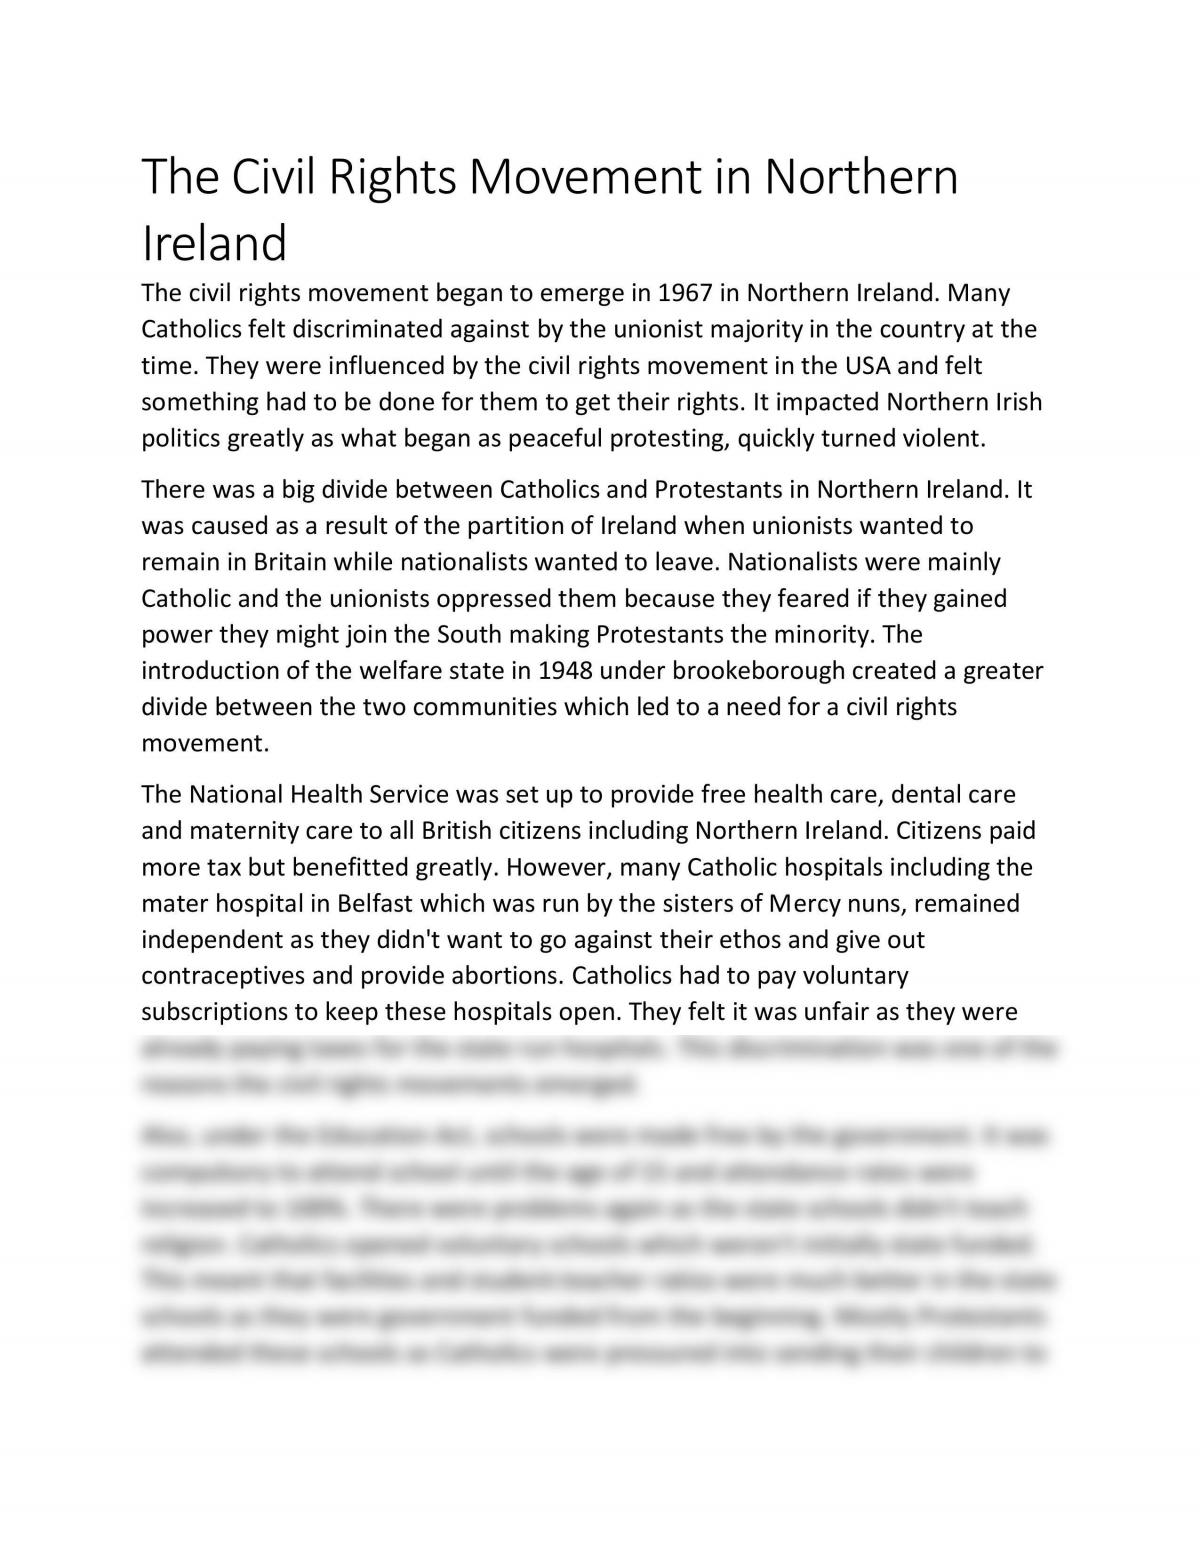 The Civil Rights Movement in Northern Ireland - Page 1